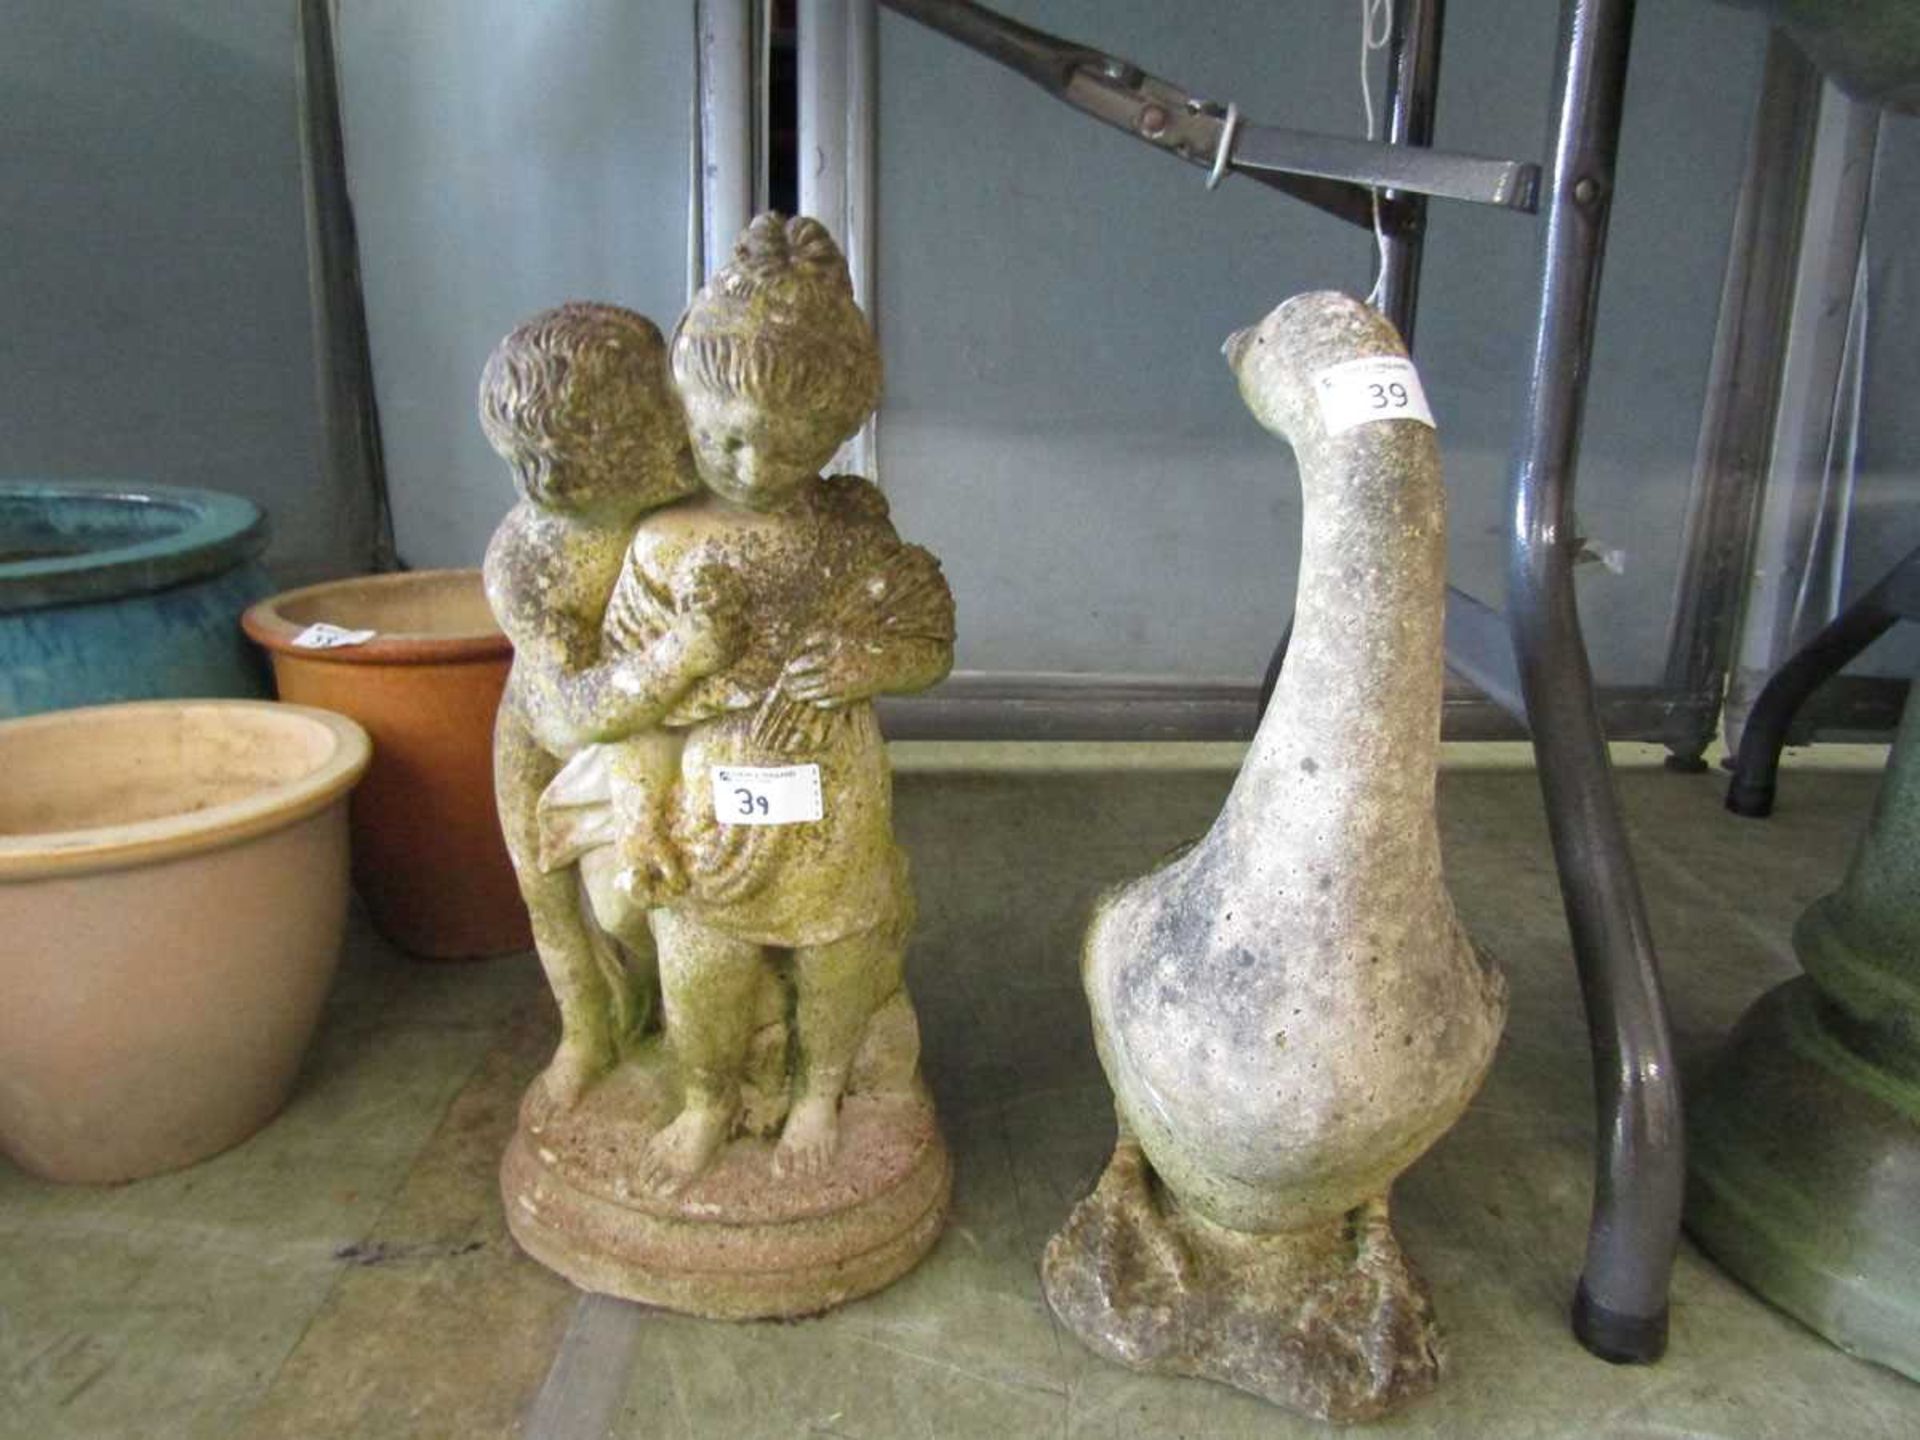 A weathered stoneware statue of a young girl together with a weathered stoneware statue of a goose